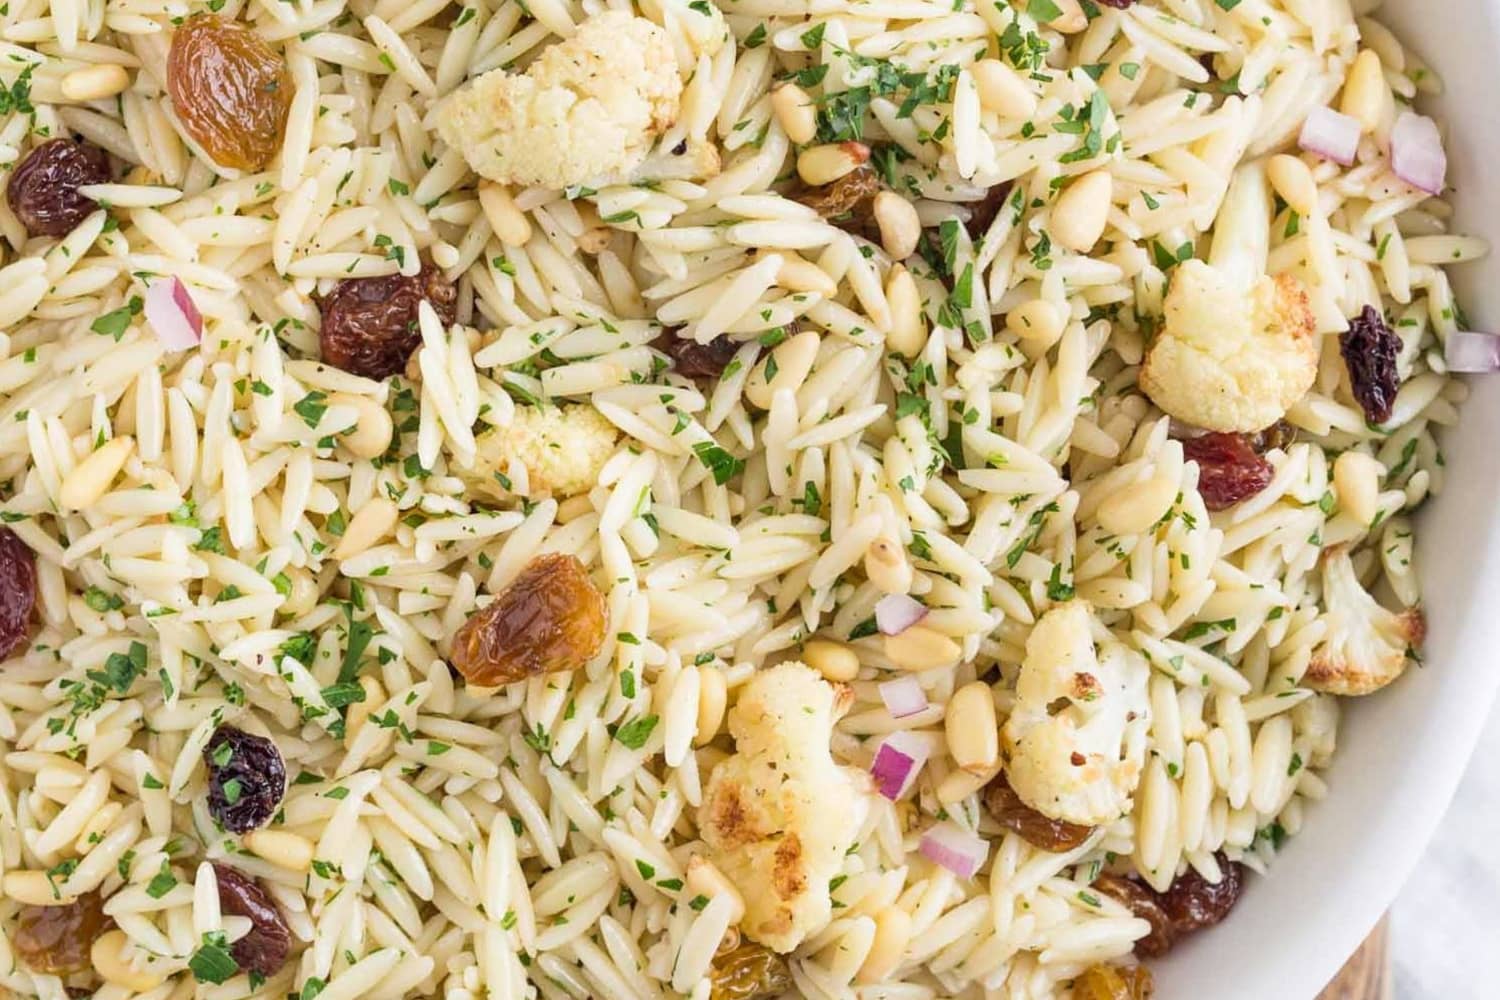 Recipe: Orzo Salad with Roasted Cauliflower, Pine Nuts, and Parsley